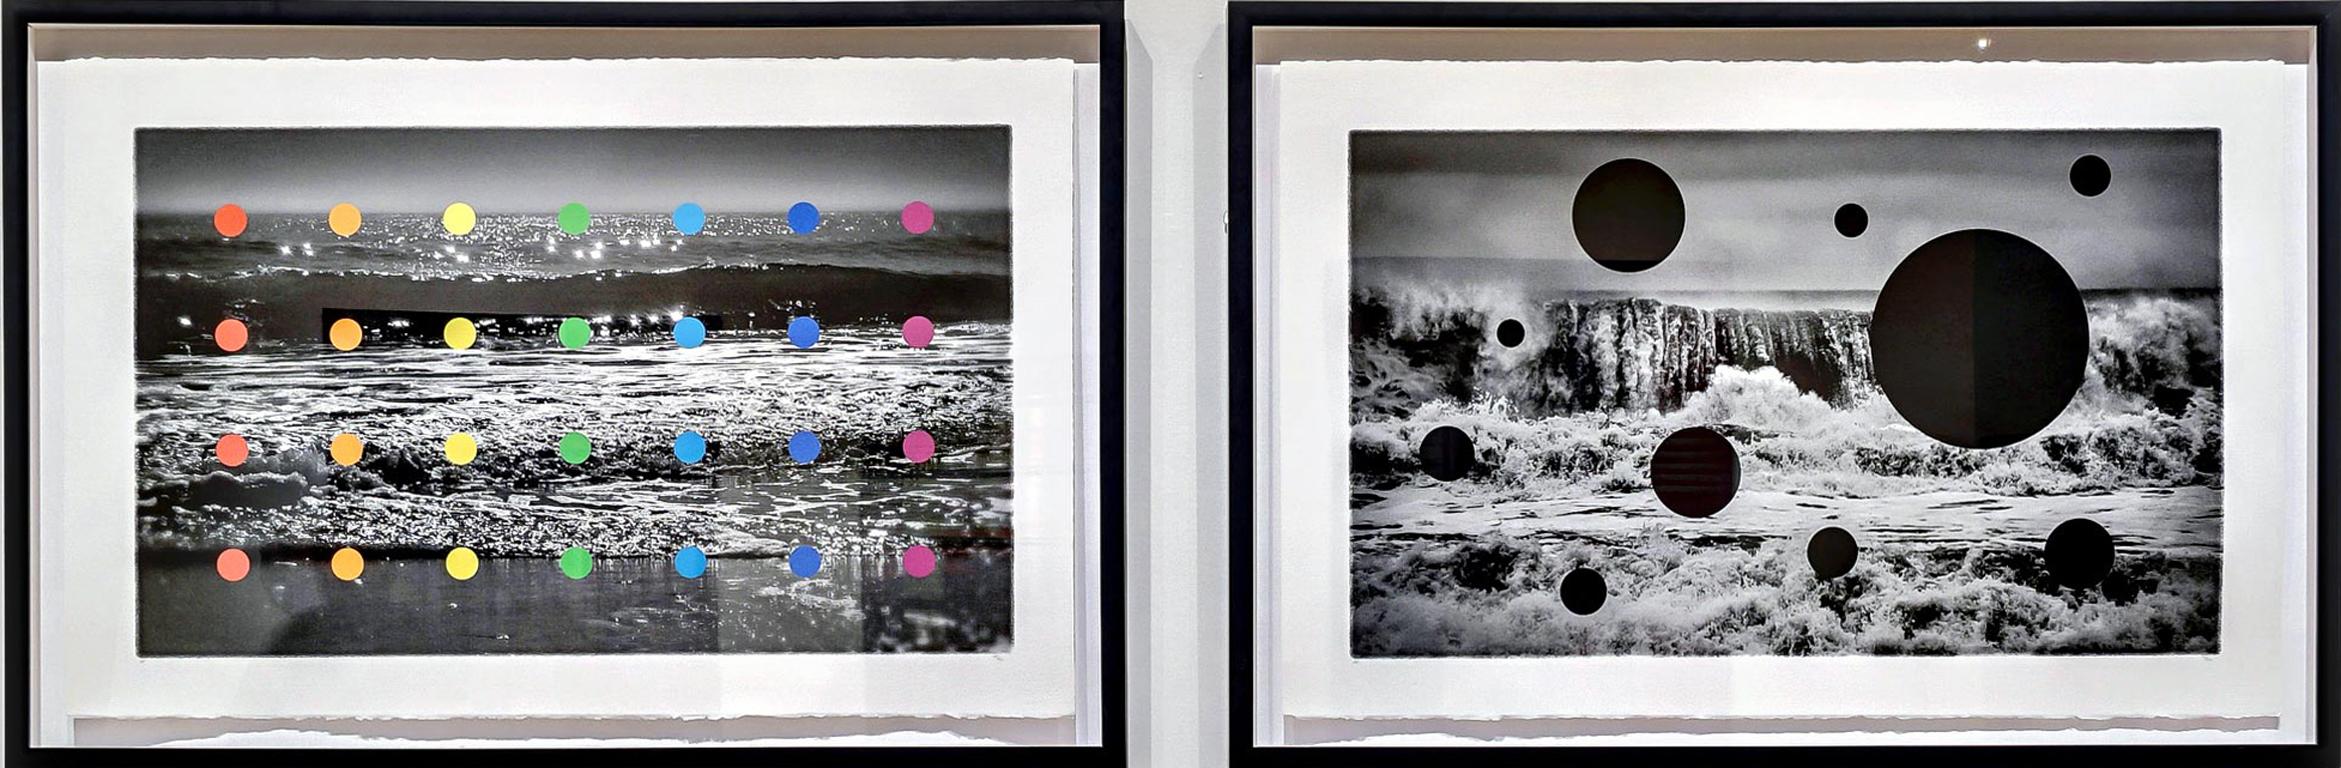 "Calm / Rage" by Lois White is a diptych of archival pigment prints on heavy cold press cotton rag.
40x26in, edition of 15, each (2 AP)

Lois White is a textile and knitwear designer, and photographer from New York City who simultaneously weaves